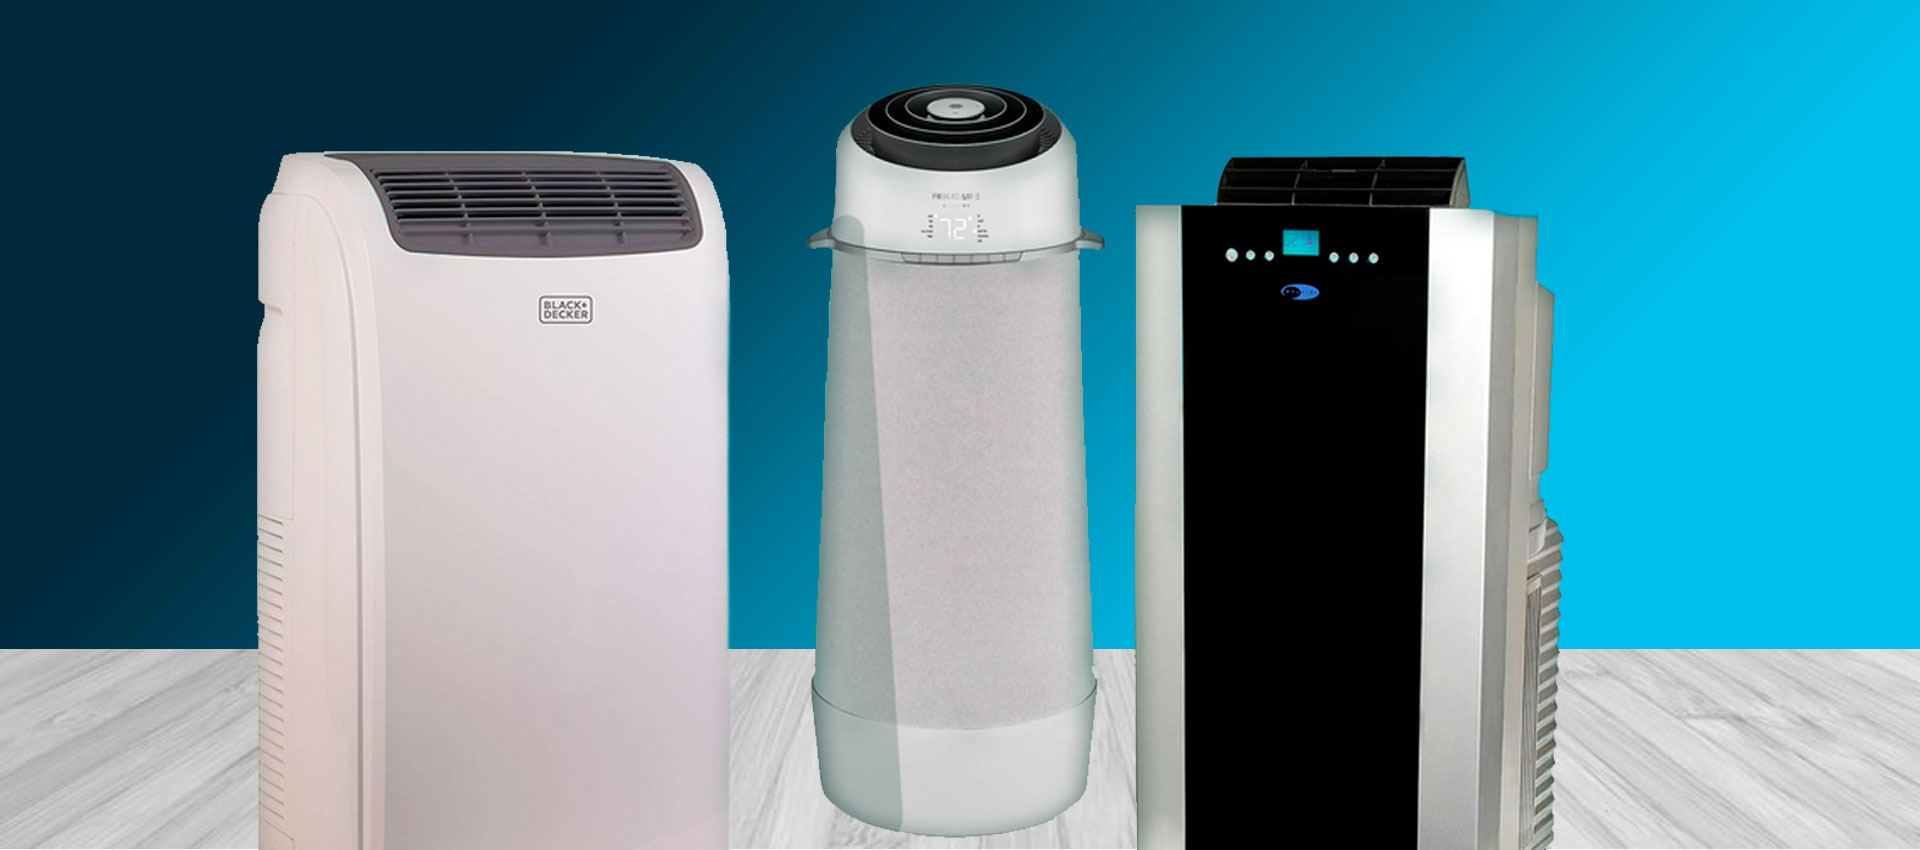 Best Portable Air Conditioner in Pakistan - You Must Buy in 2020